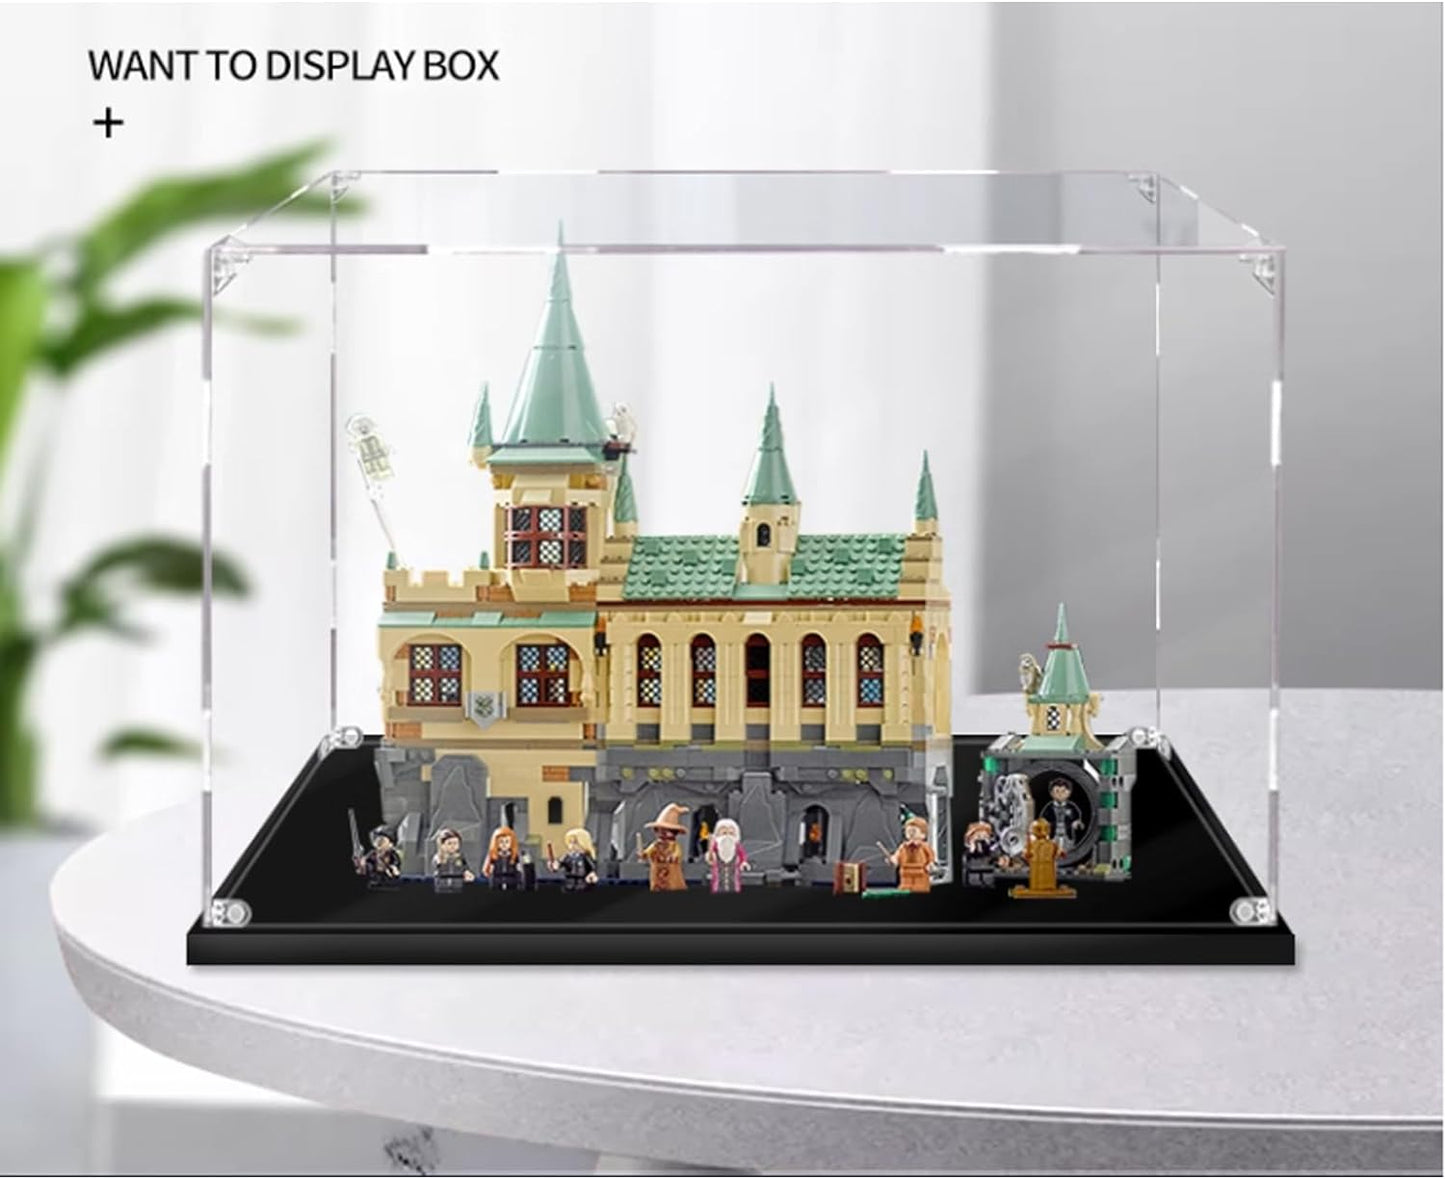 Acrylic Display Case Compatible with Lego 76389 Harry Potter Hogwarts Chamber of Secrets Building Block Model Clear Dust Box Cover Collectibles Protective Case -Models are not Included (2mm)